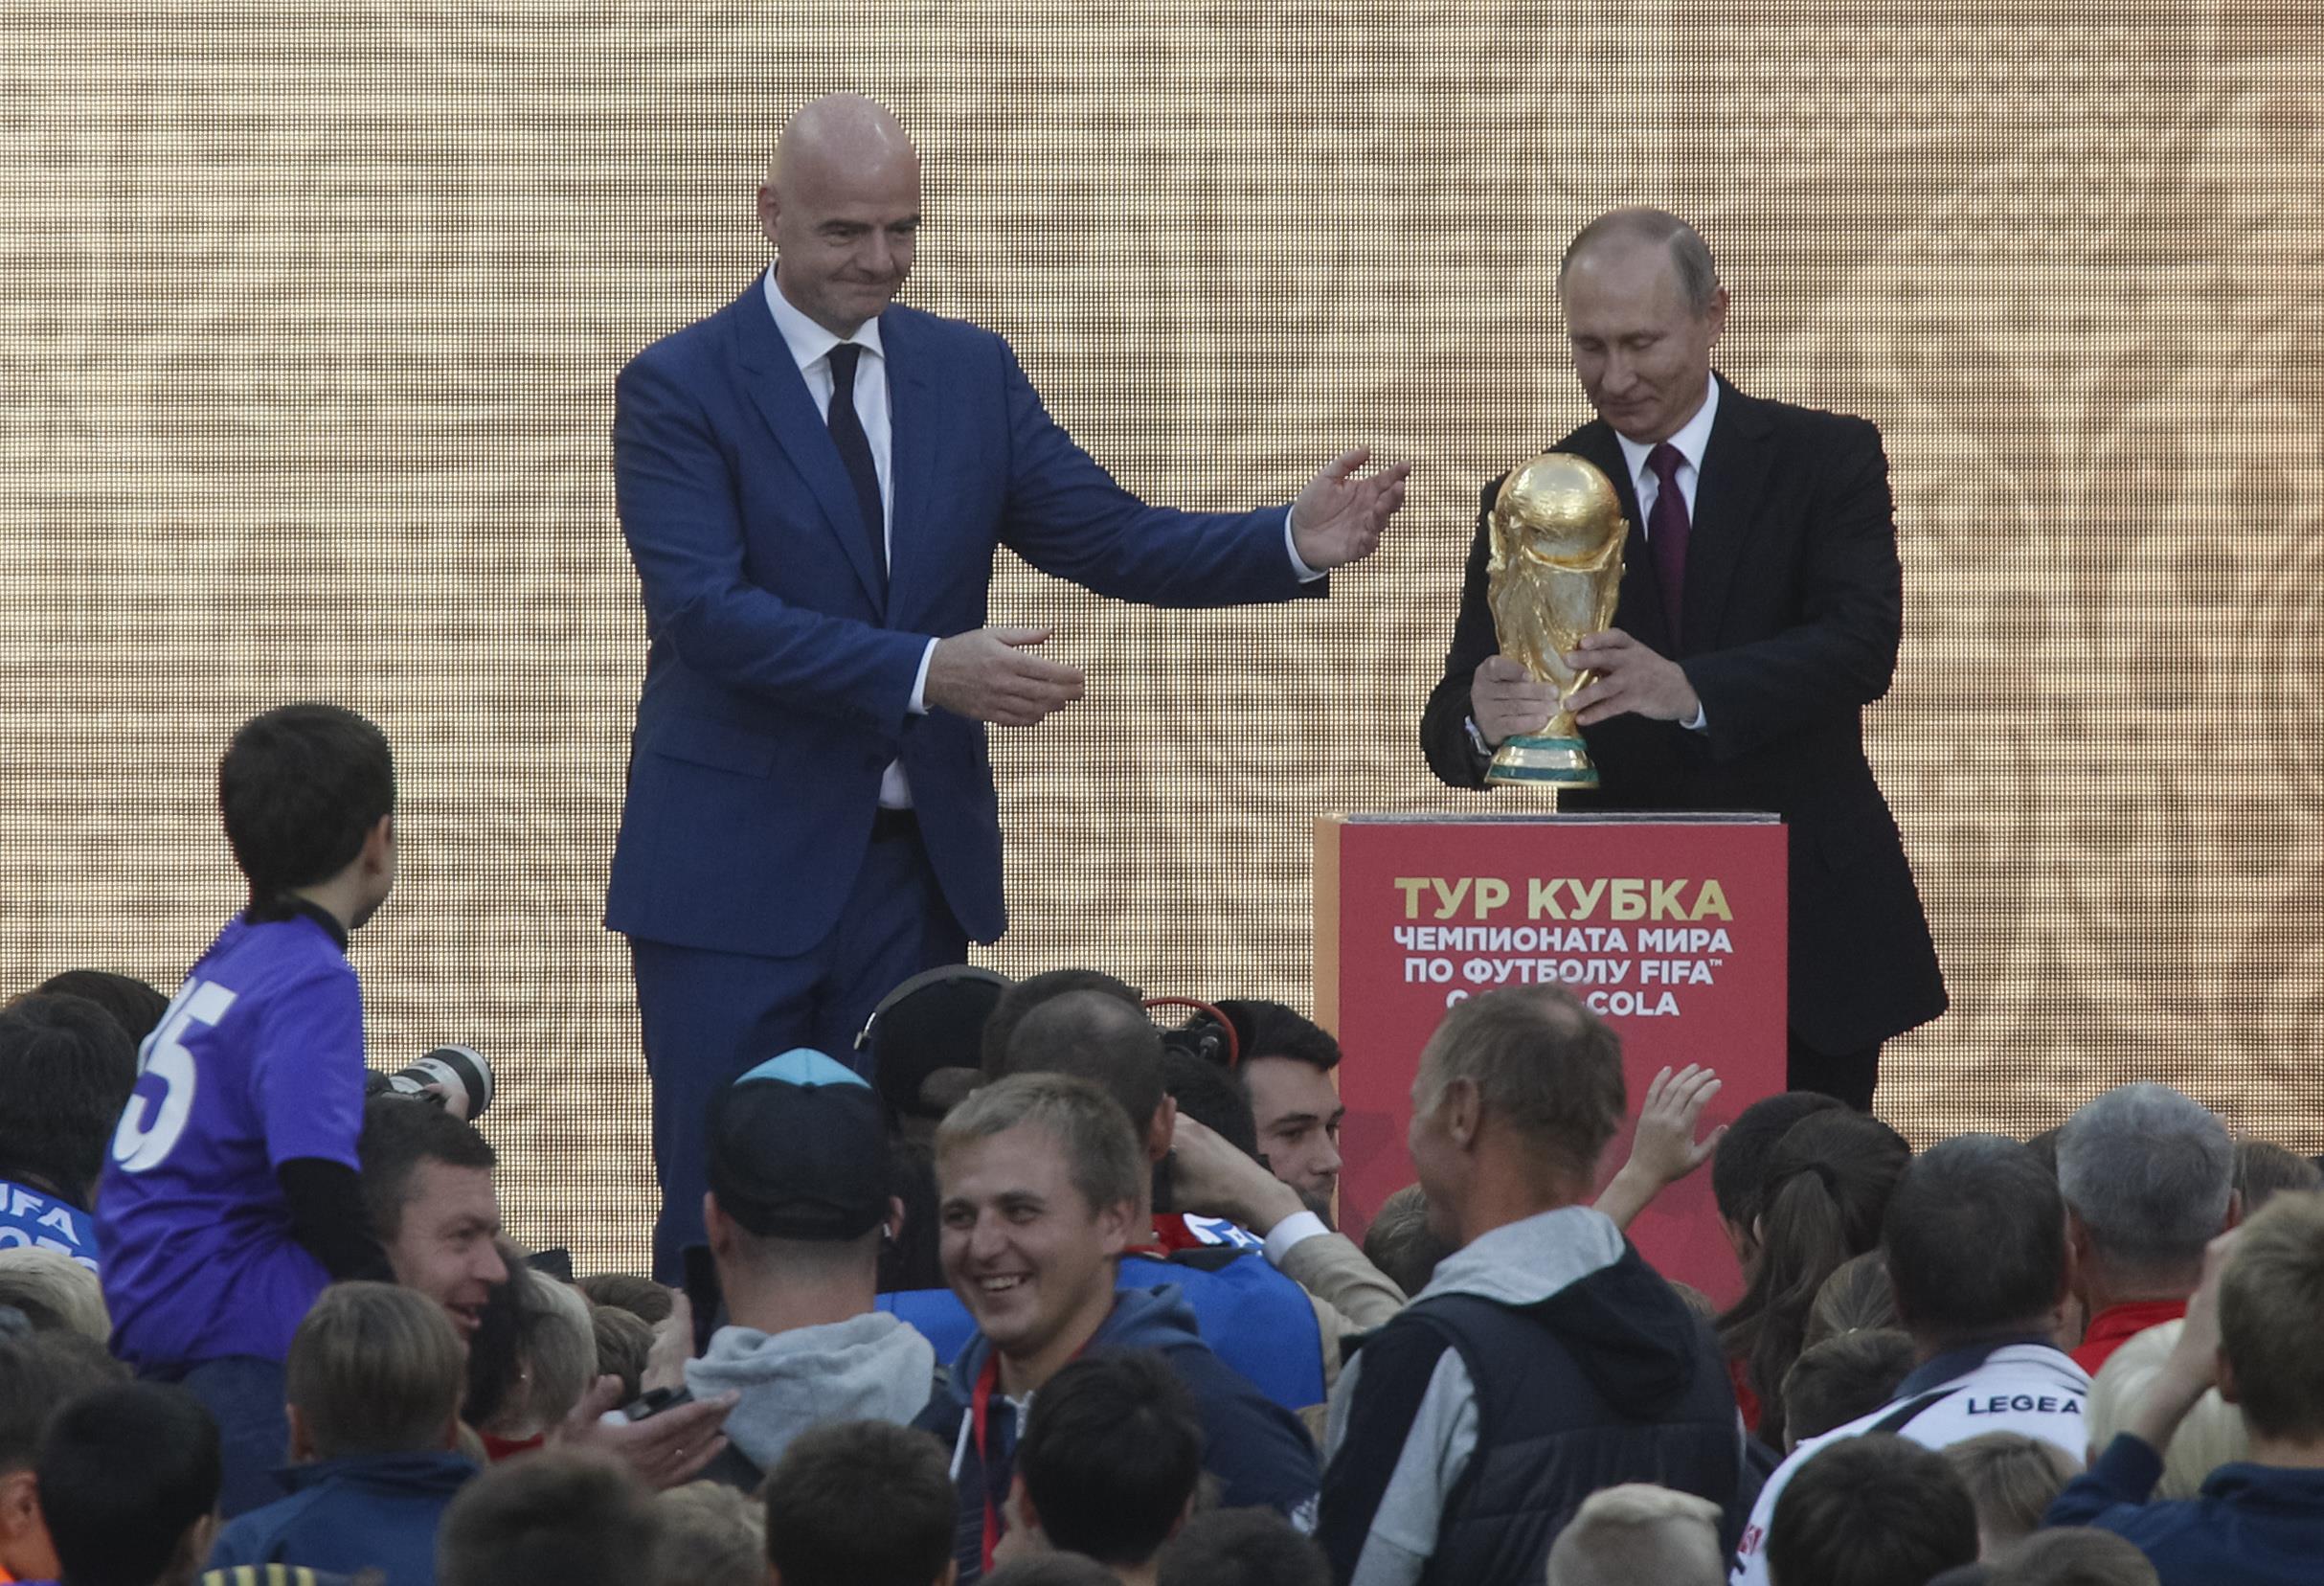 Football: Putin, FIFA chief Infantino send main trophy on Russia tour before 2018 World Cup